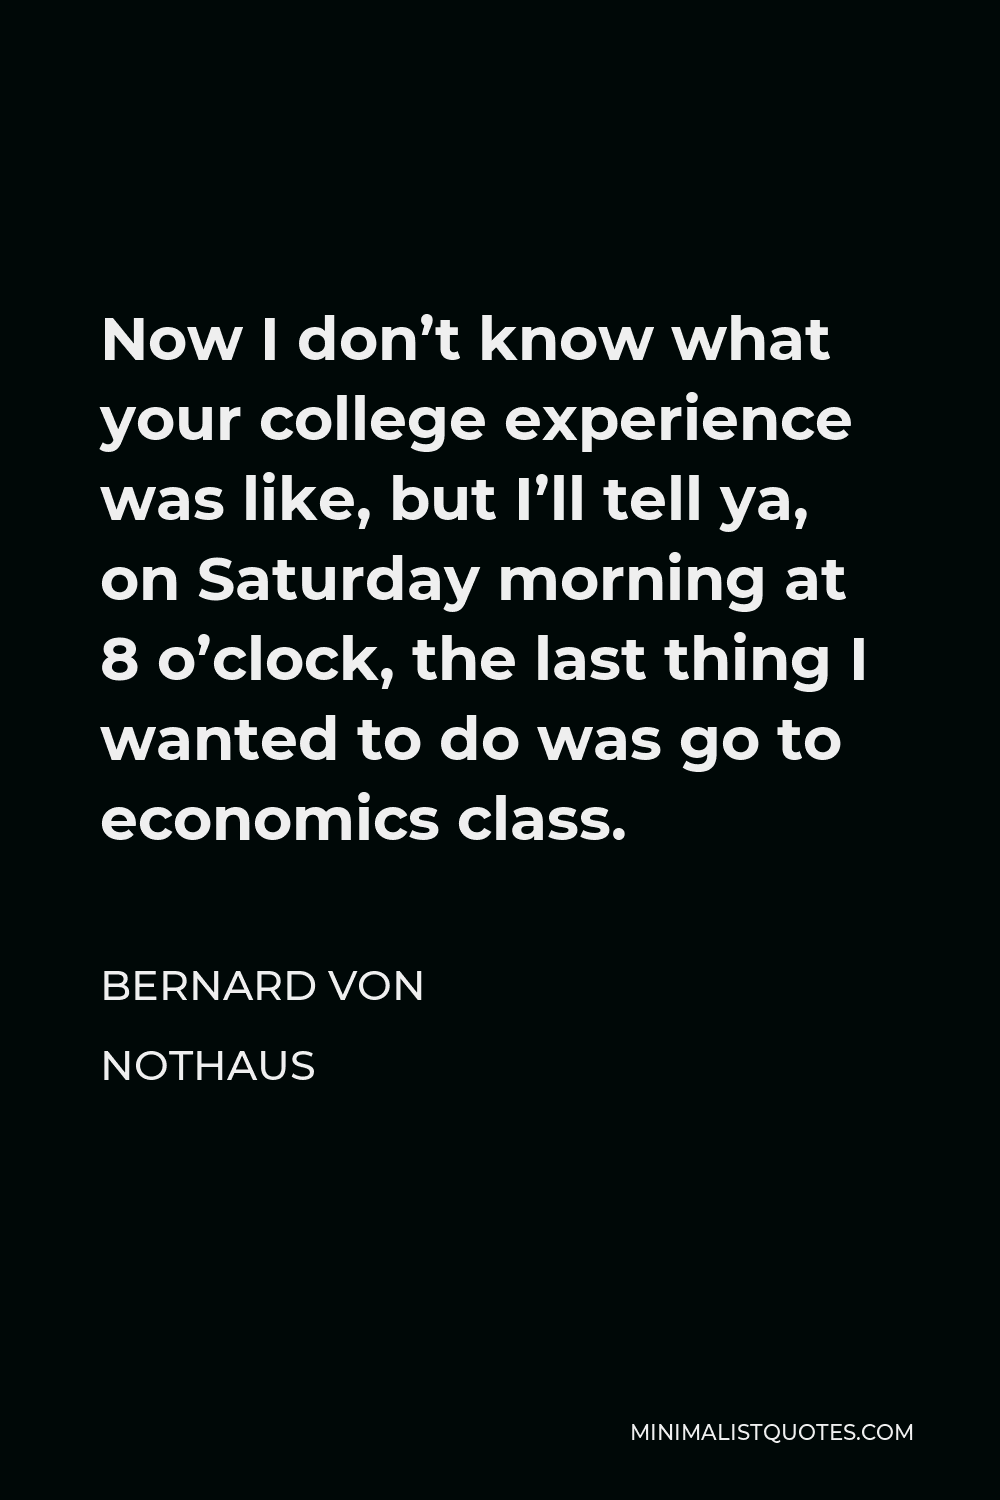 Bernard von NotHaus Quote - Now I don’t know what your college experience was like, but I’ll tell ya, on Saturday morning at 8 o’clock, the last thing I wanted to do was go to economics class.